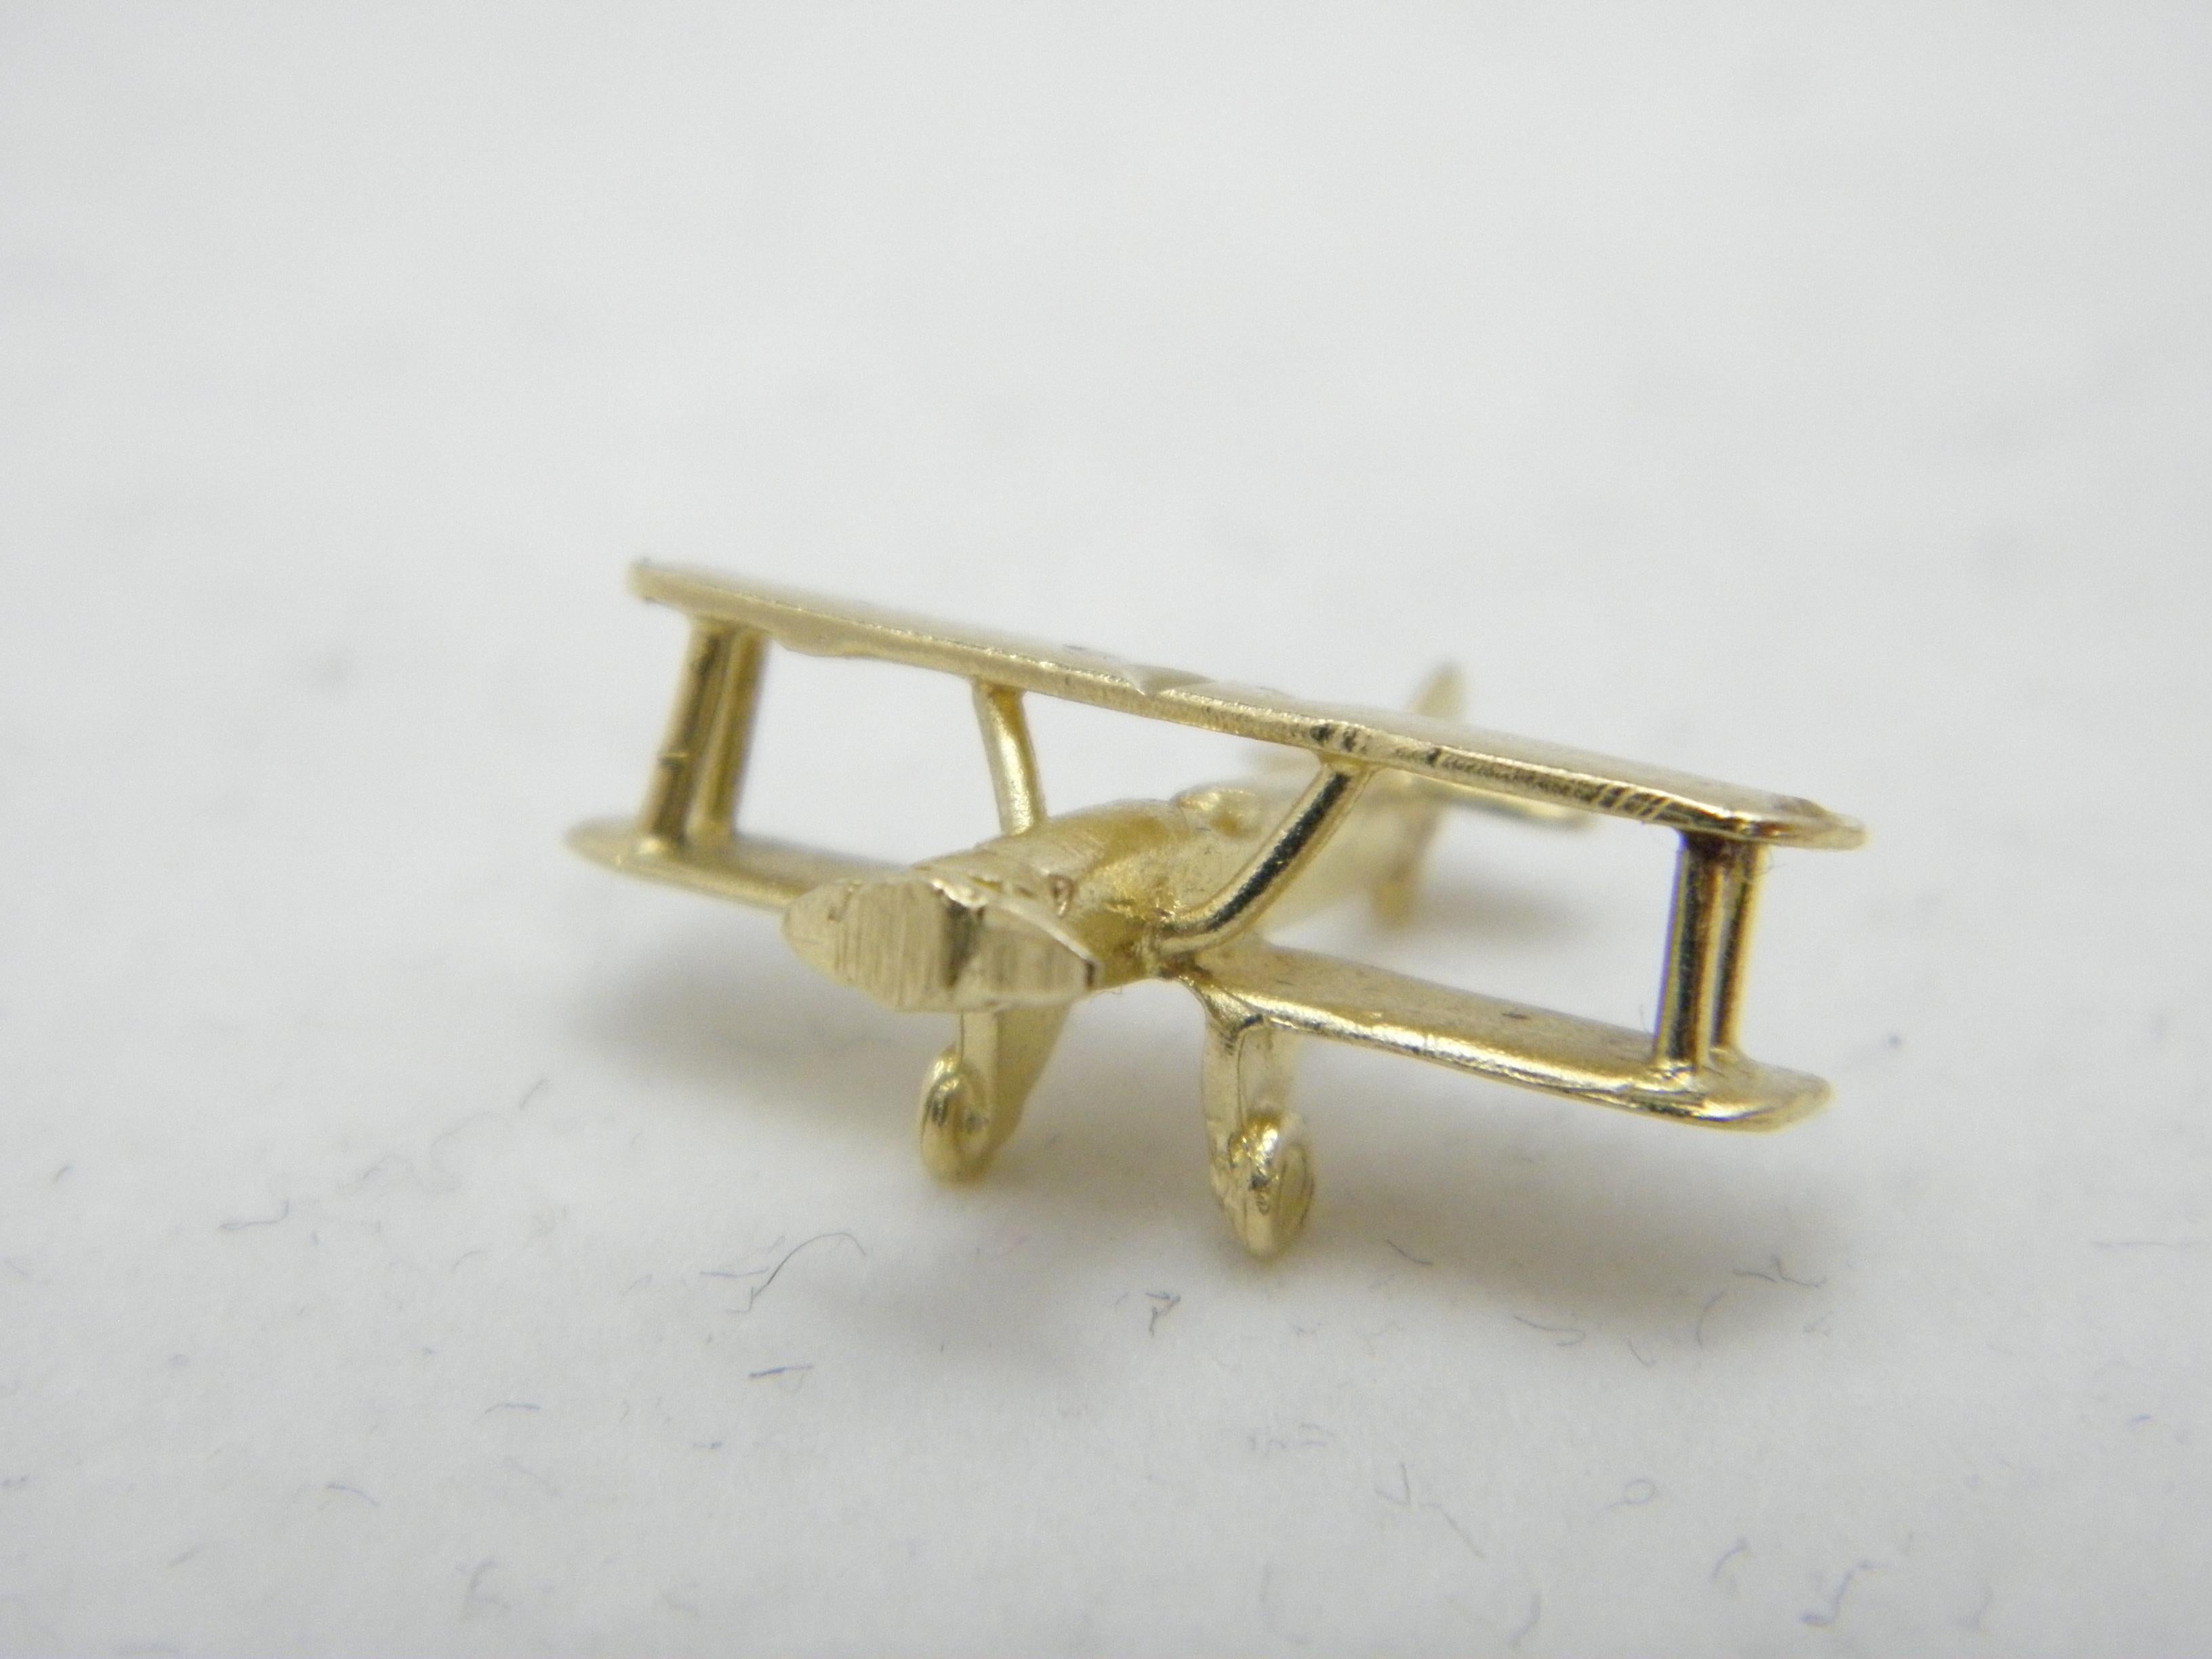 Contemporary Vintage 14ct Gold Biplane Aeroplane Model Charm Fob c1970s 585 Purity Heavy For Sale